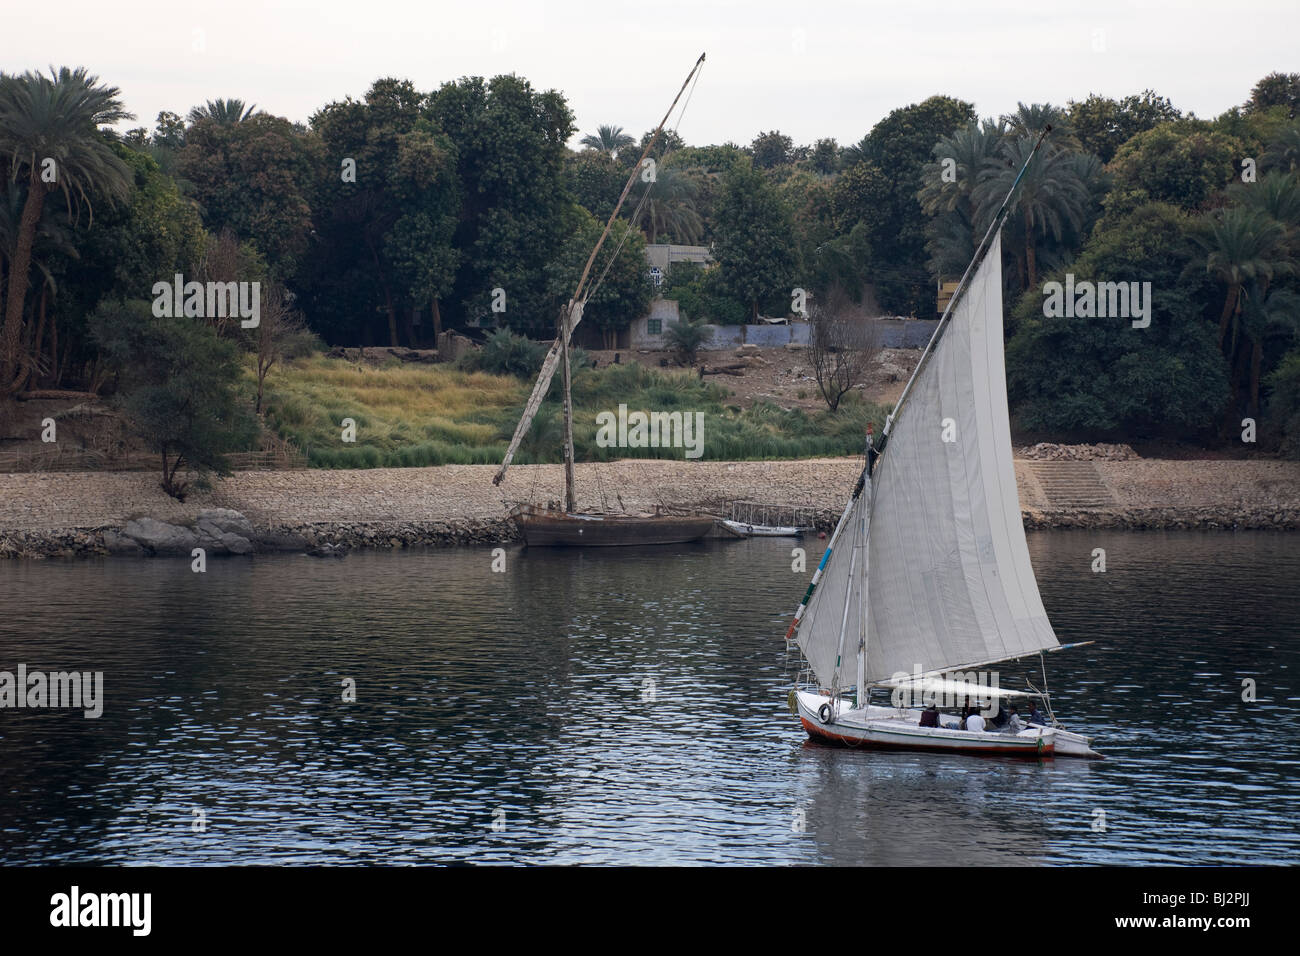 A Felucca catches the breeze as it sails along the River Nile. Stock Photo